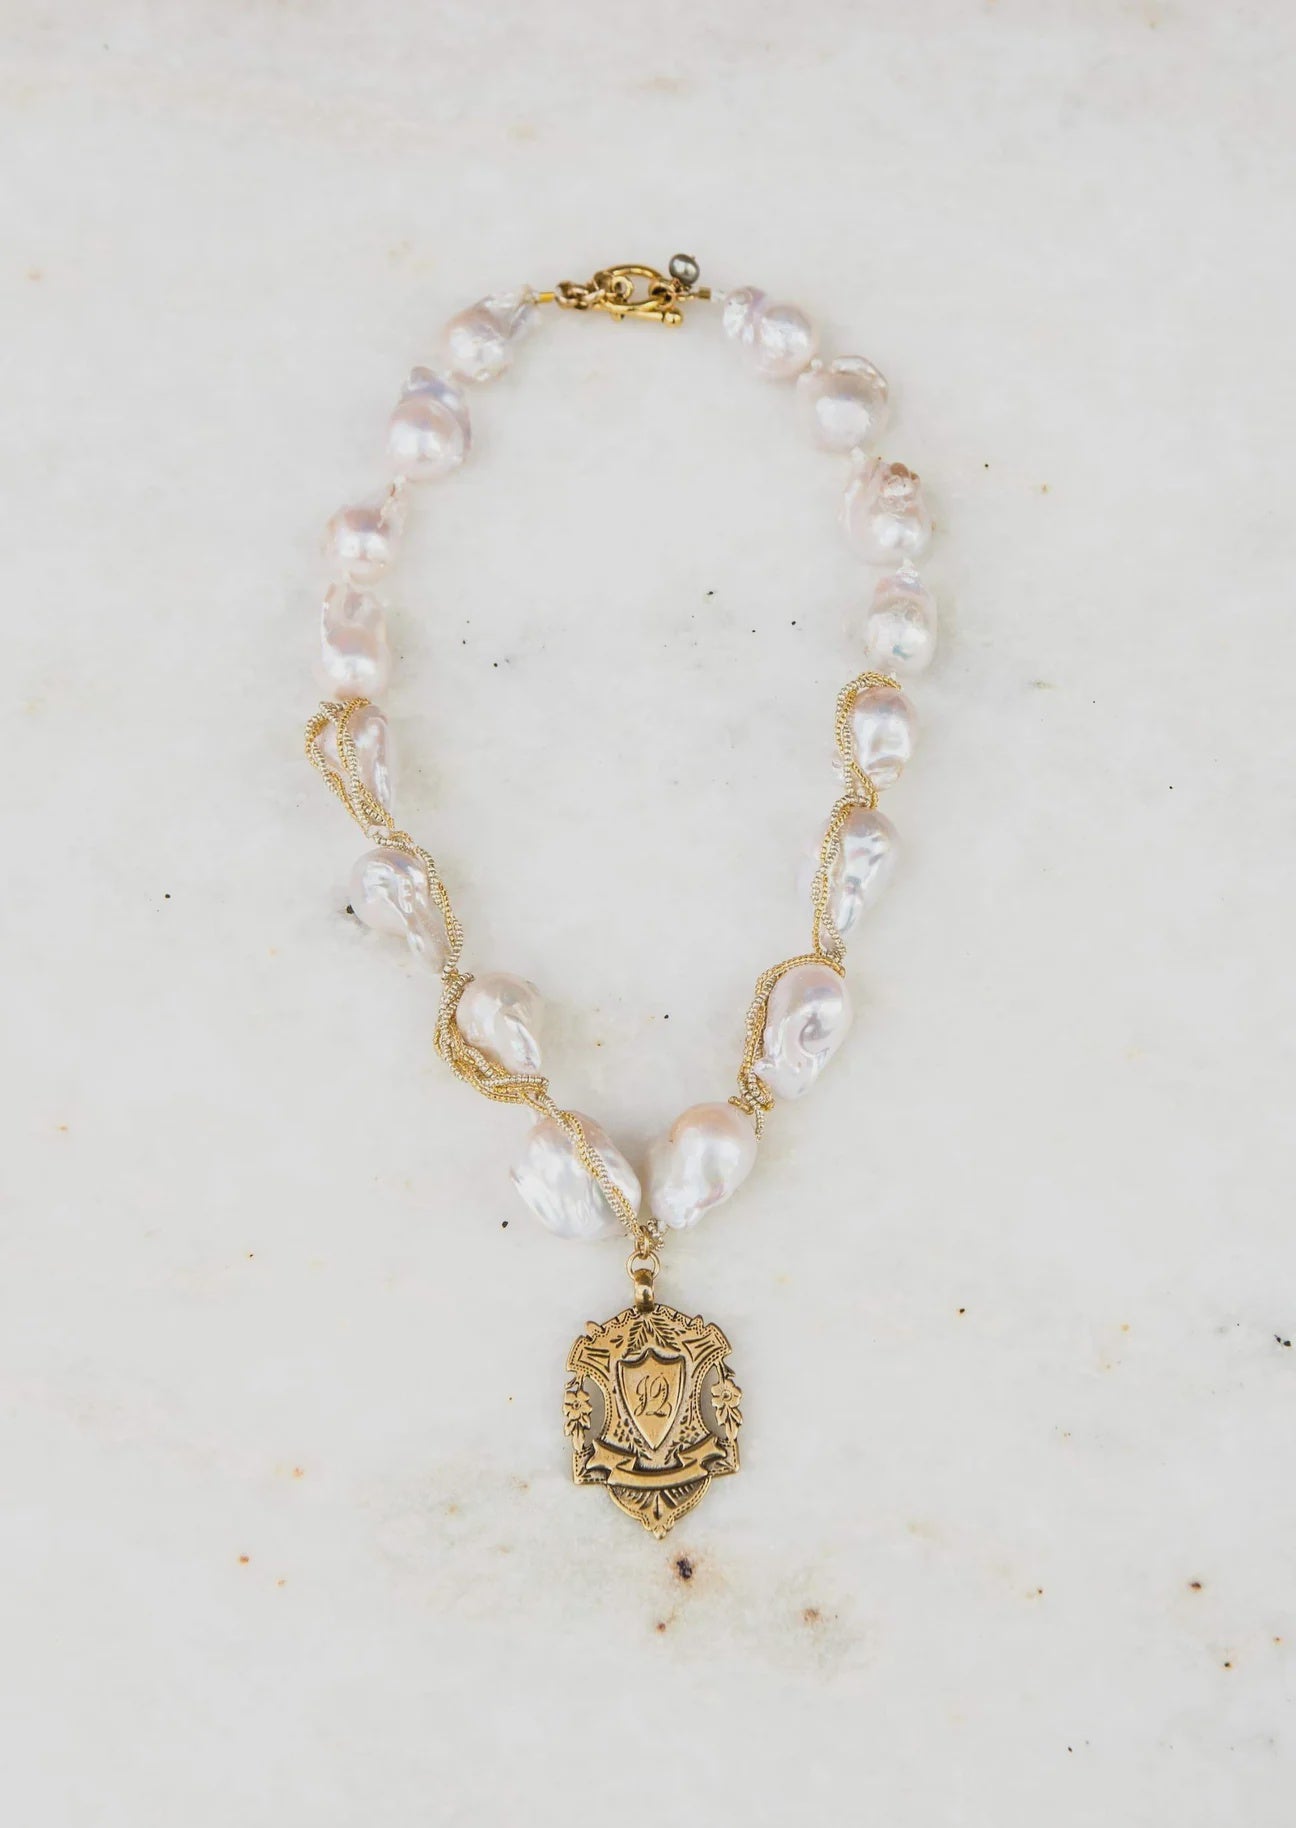 Elegant necklace featuring large baroque pearls interspersed with twisted gold links, centered by an Wrapped Ivory Pearl & Shield pendant displaying a vintage Arizona style, on a white marble background by Bittersweet Designs.